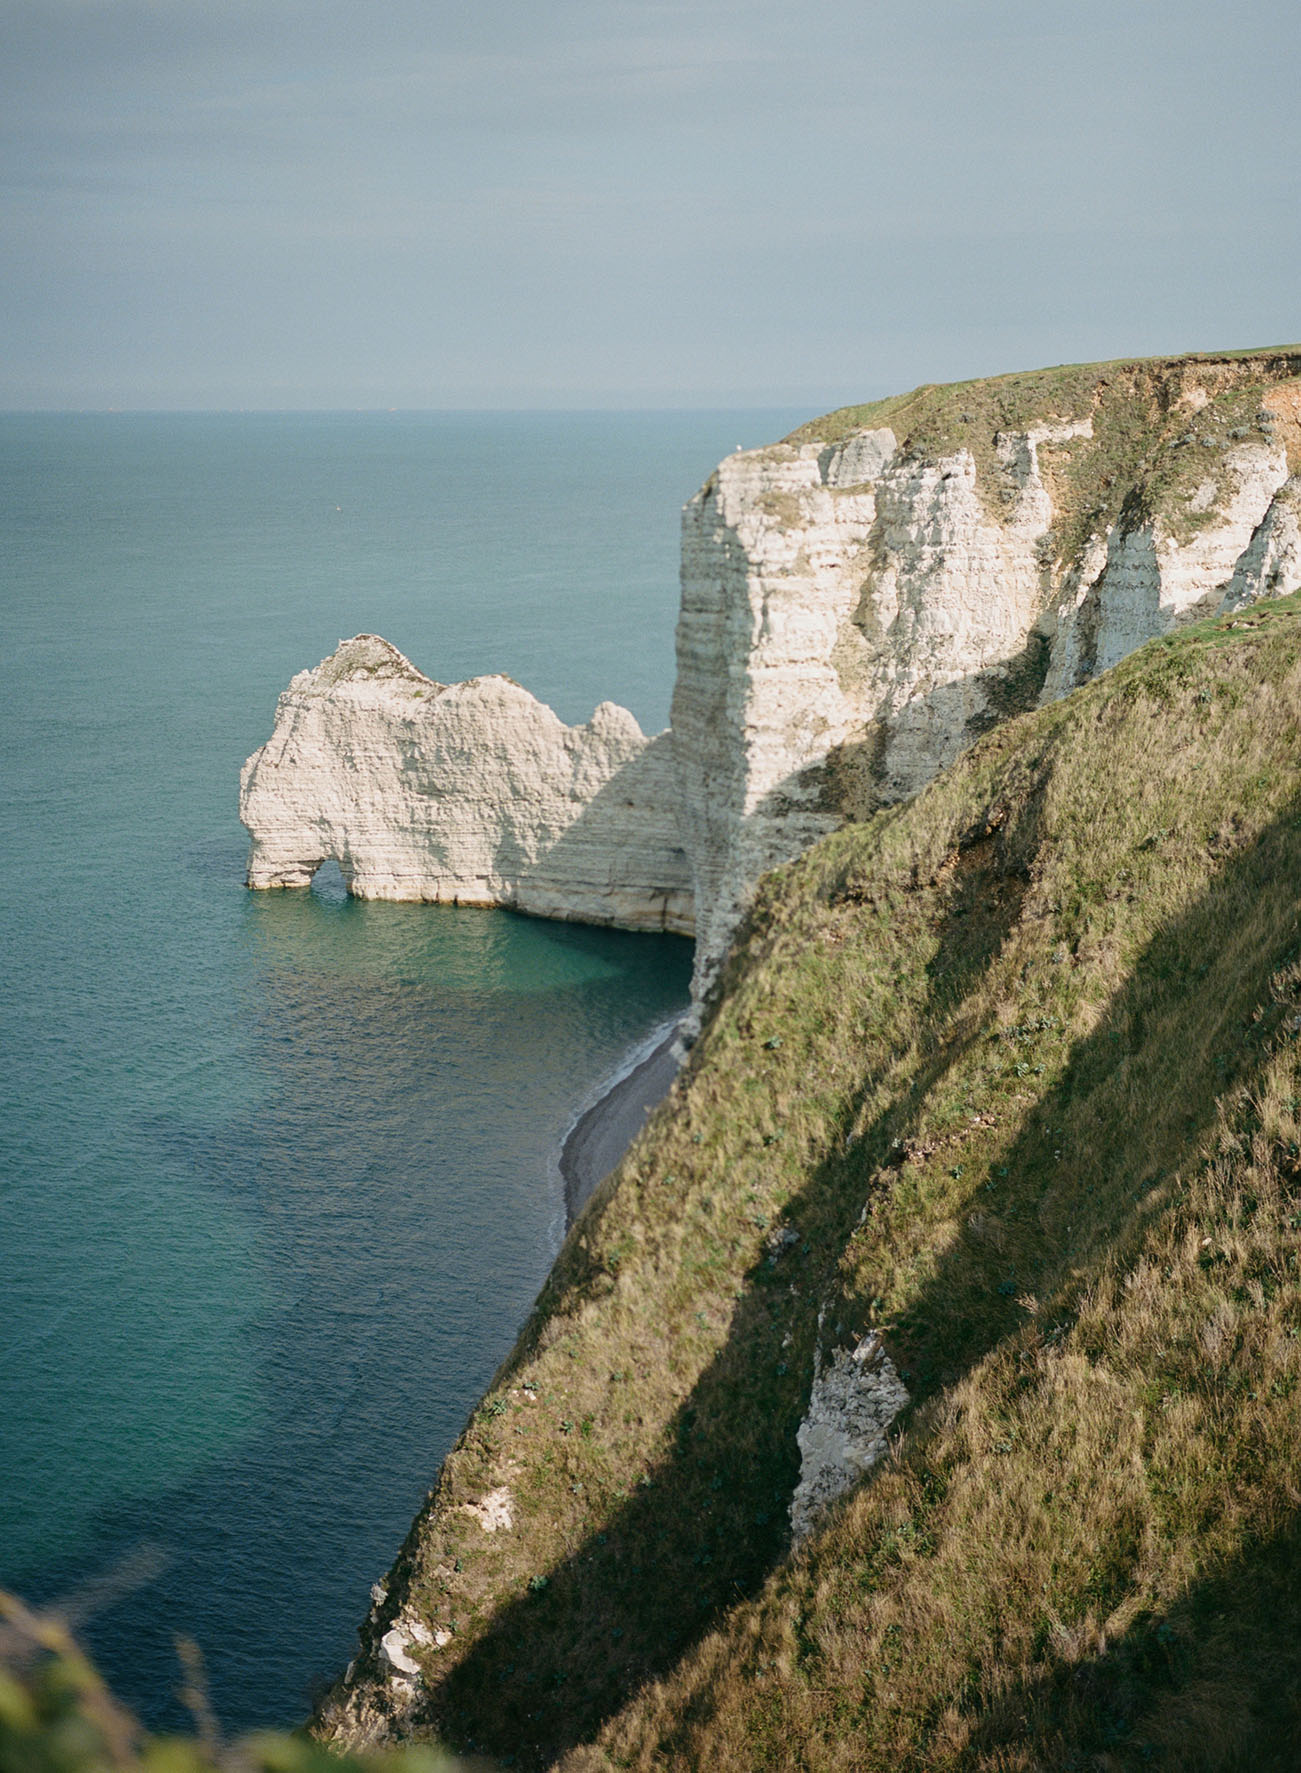 Large French cliffs on dropping down into a clear, calm blue ocean 